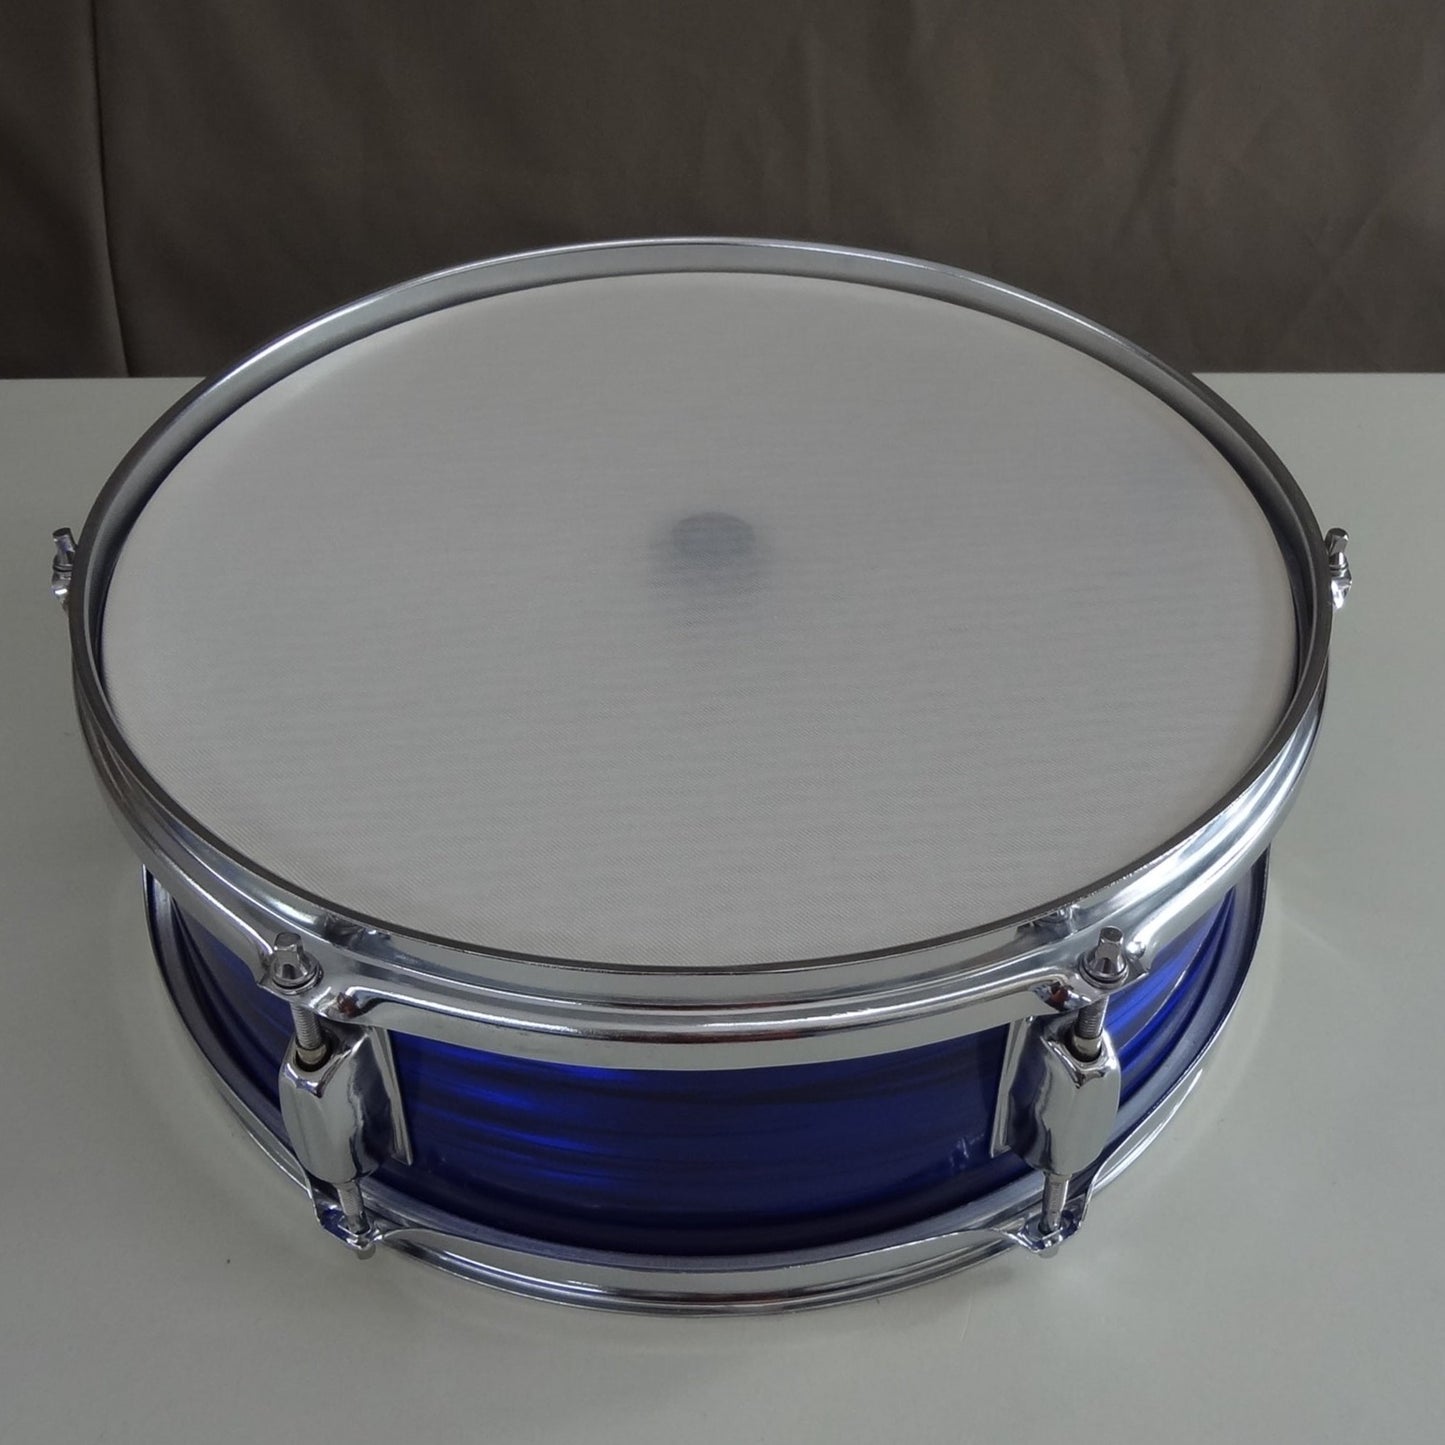 Top down image of new 13 inch custom electronic snare drum blue oyster